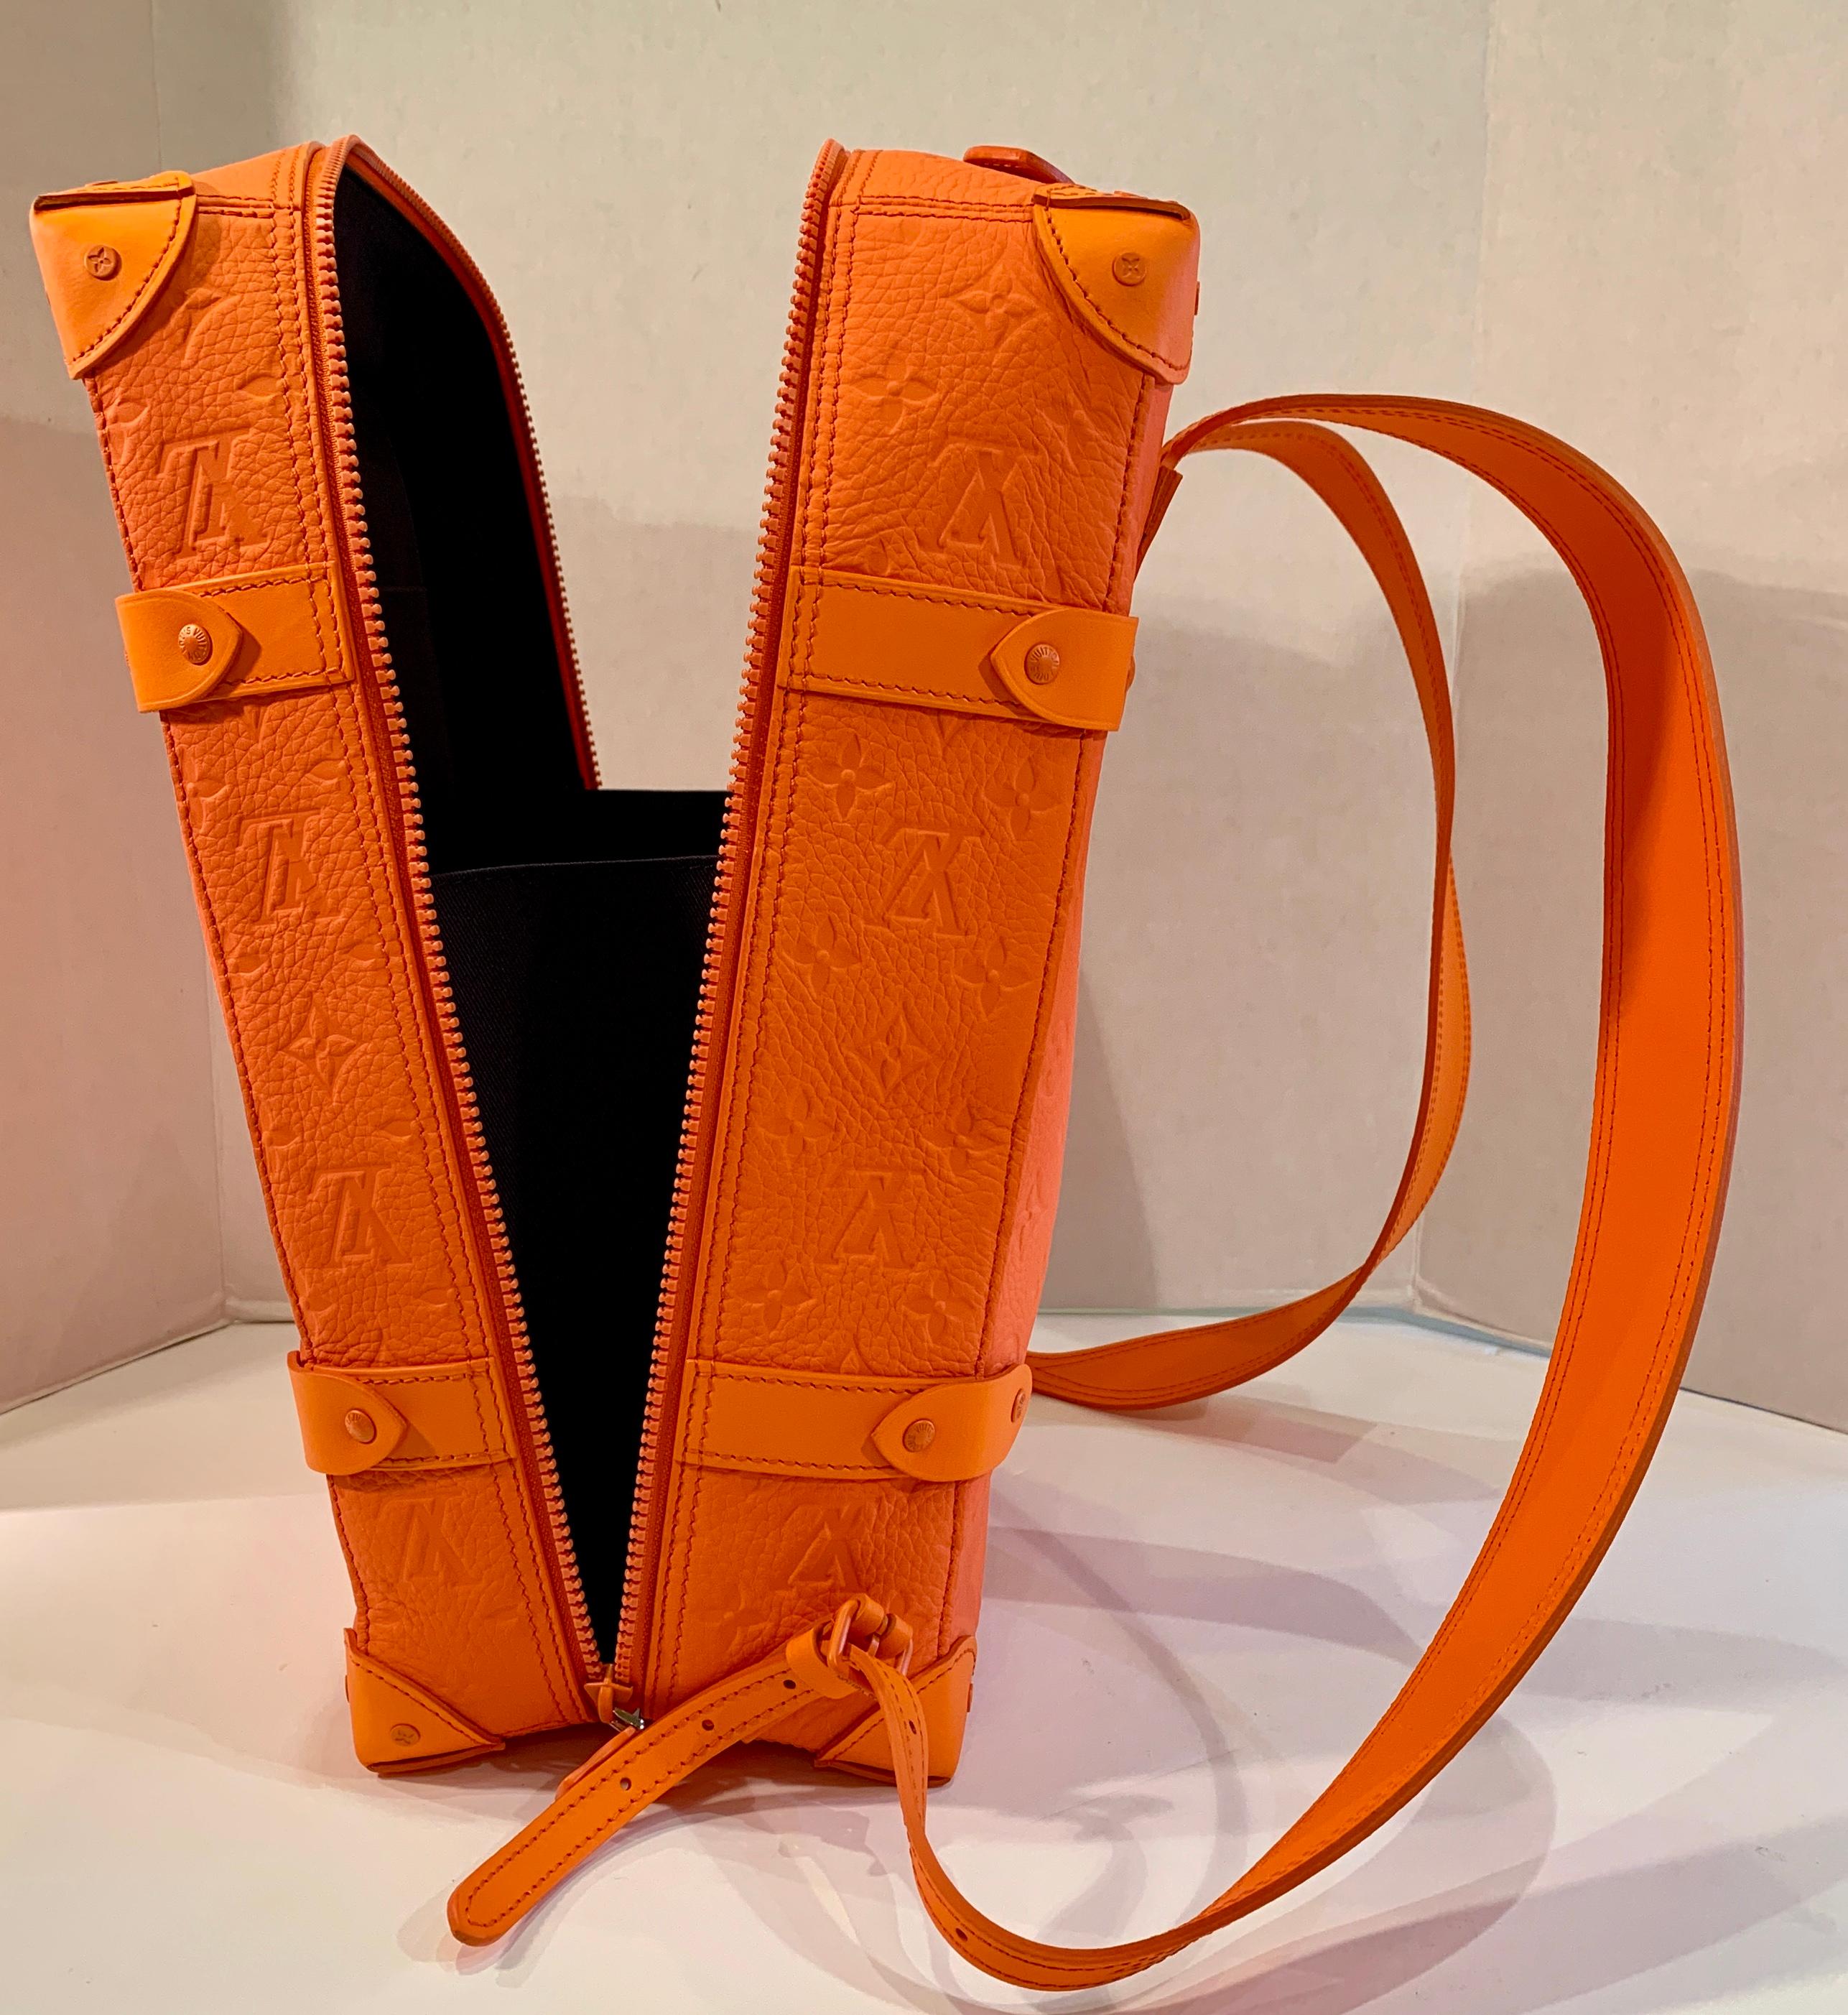 SOLD OUT Louis Vuitton Virgil Abloh Figures of Speech Orange Soft Trunk Backpack 1